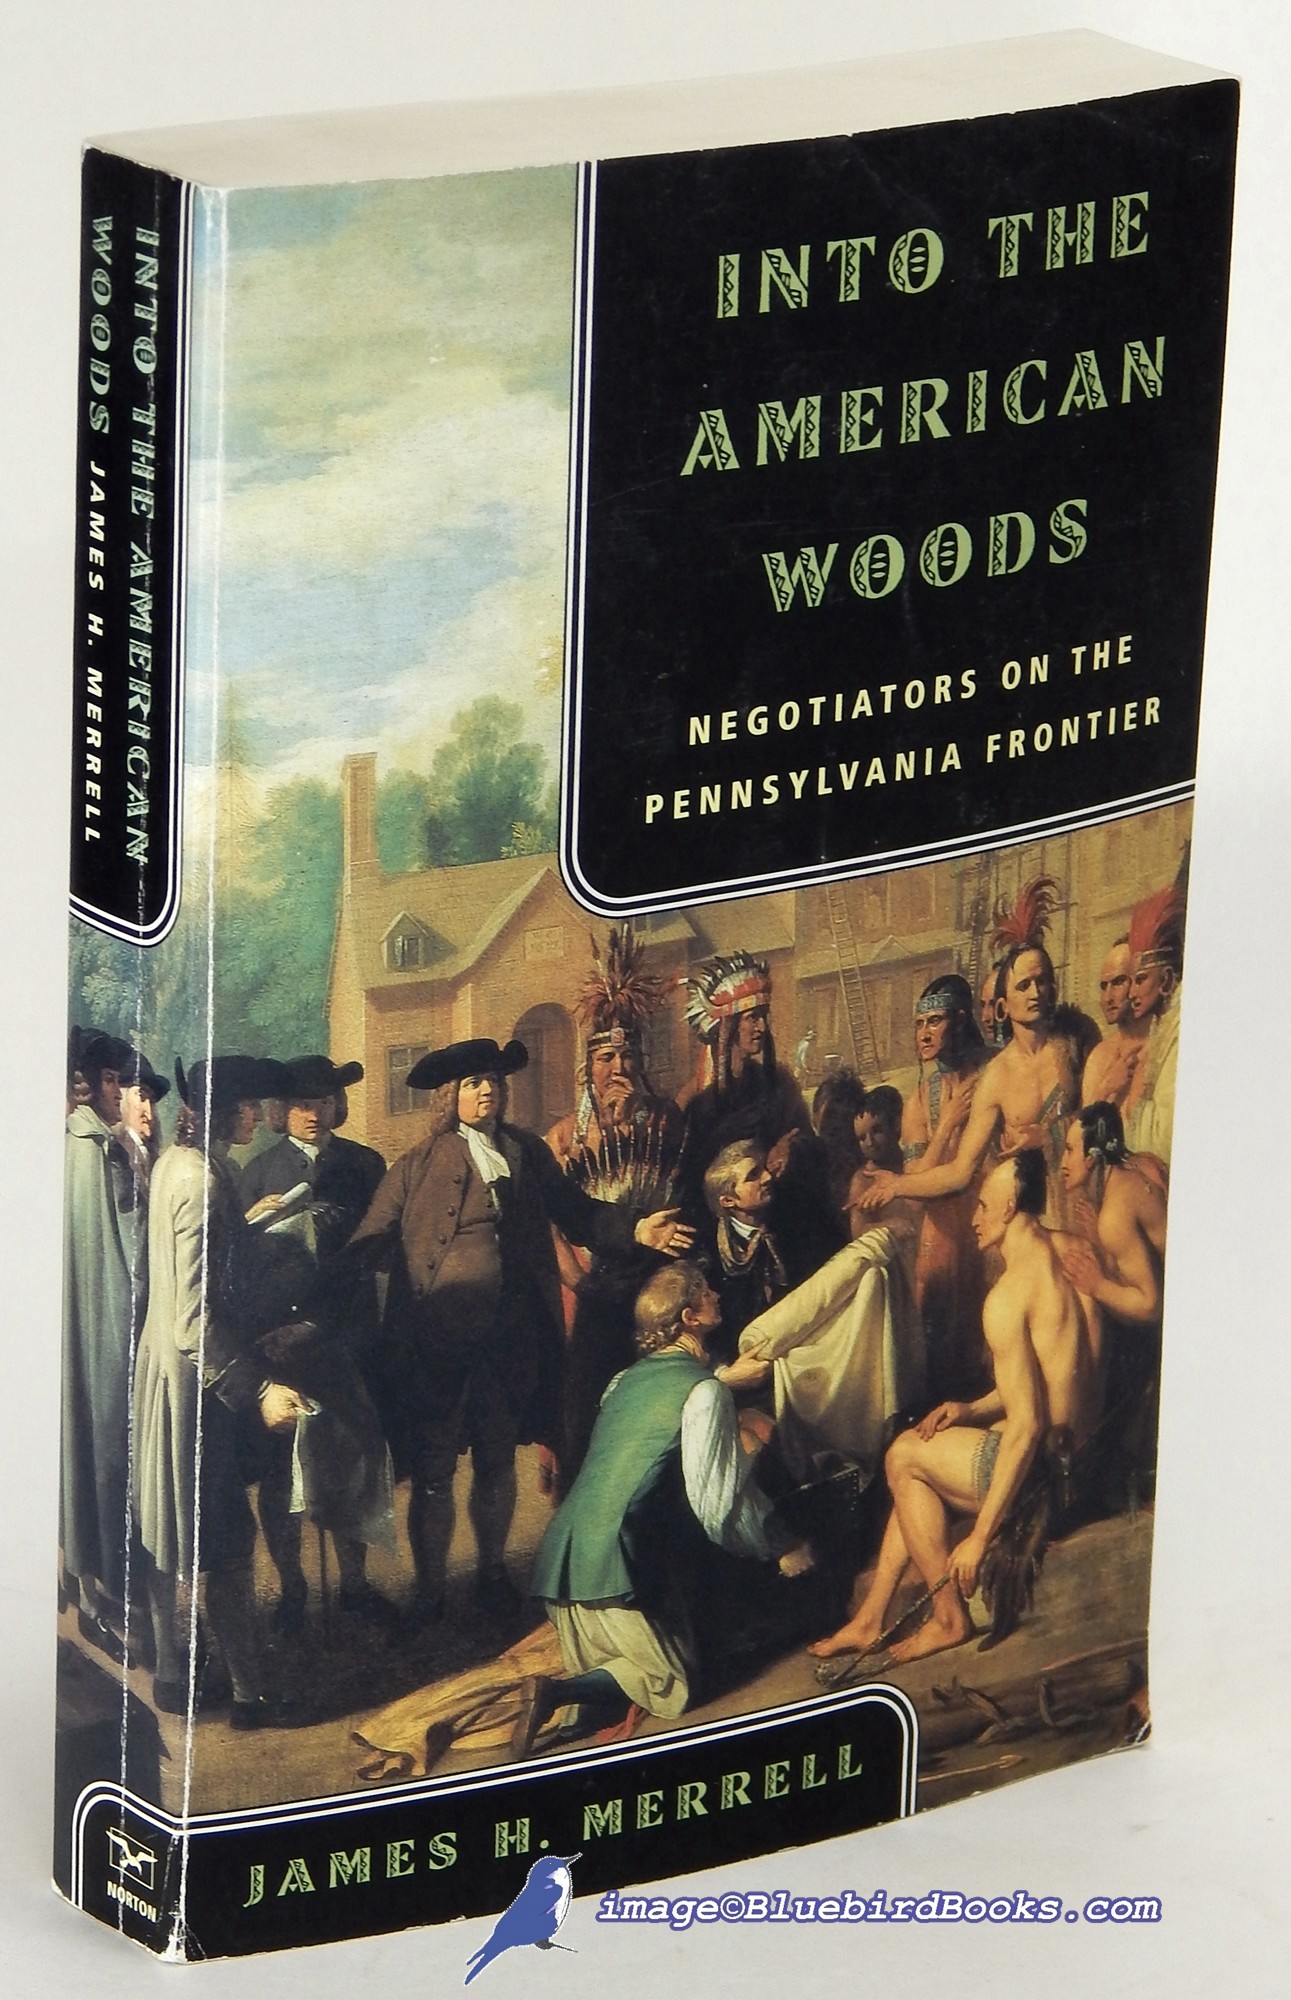 MERRELL, JAMES H. - Into the American Woods: Negotiators on the Pennsylvania Frontier